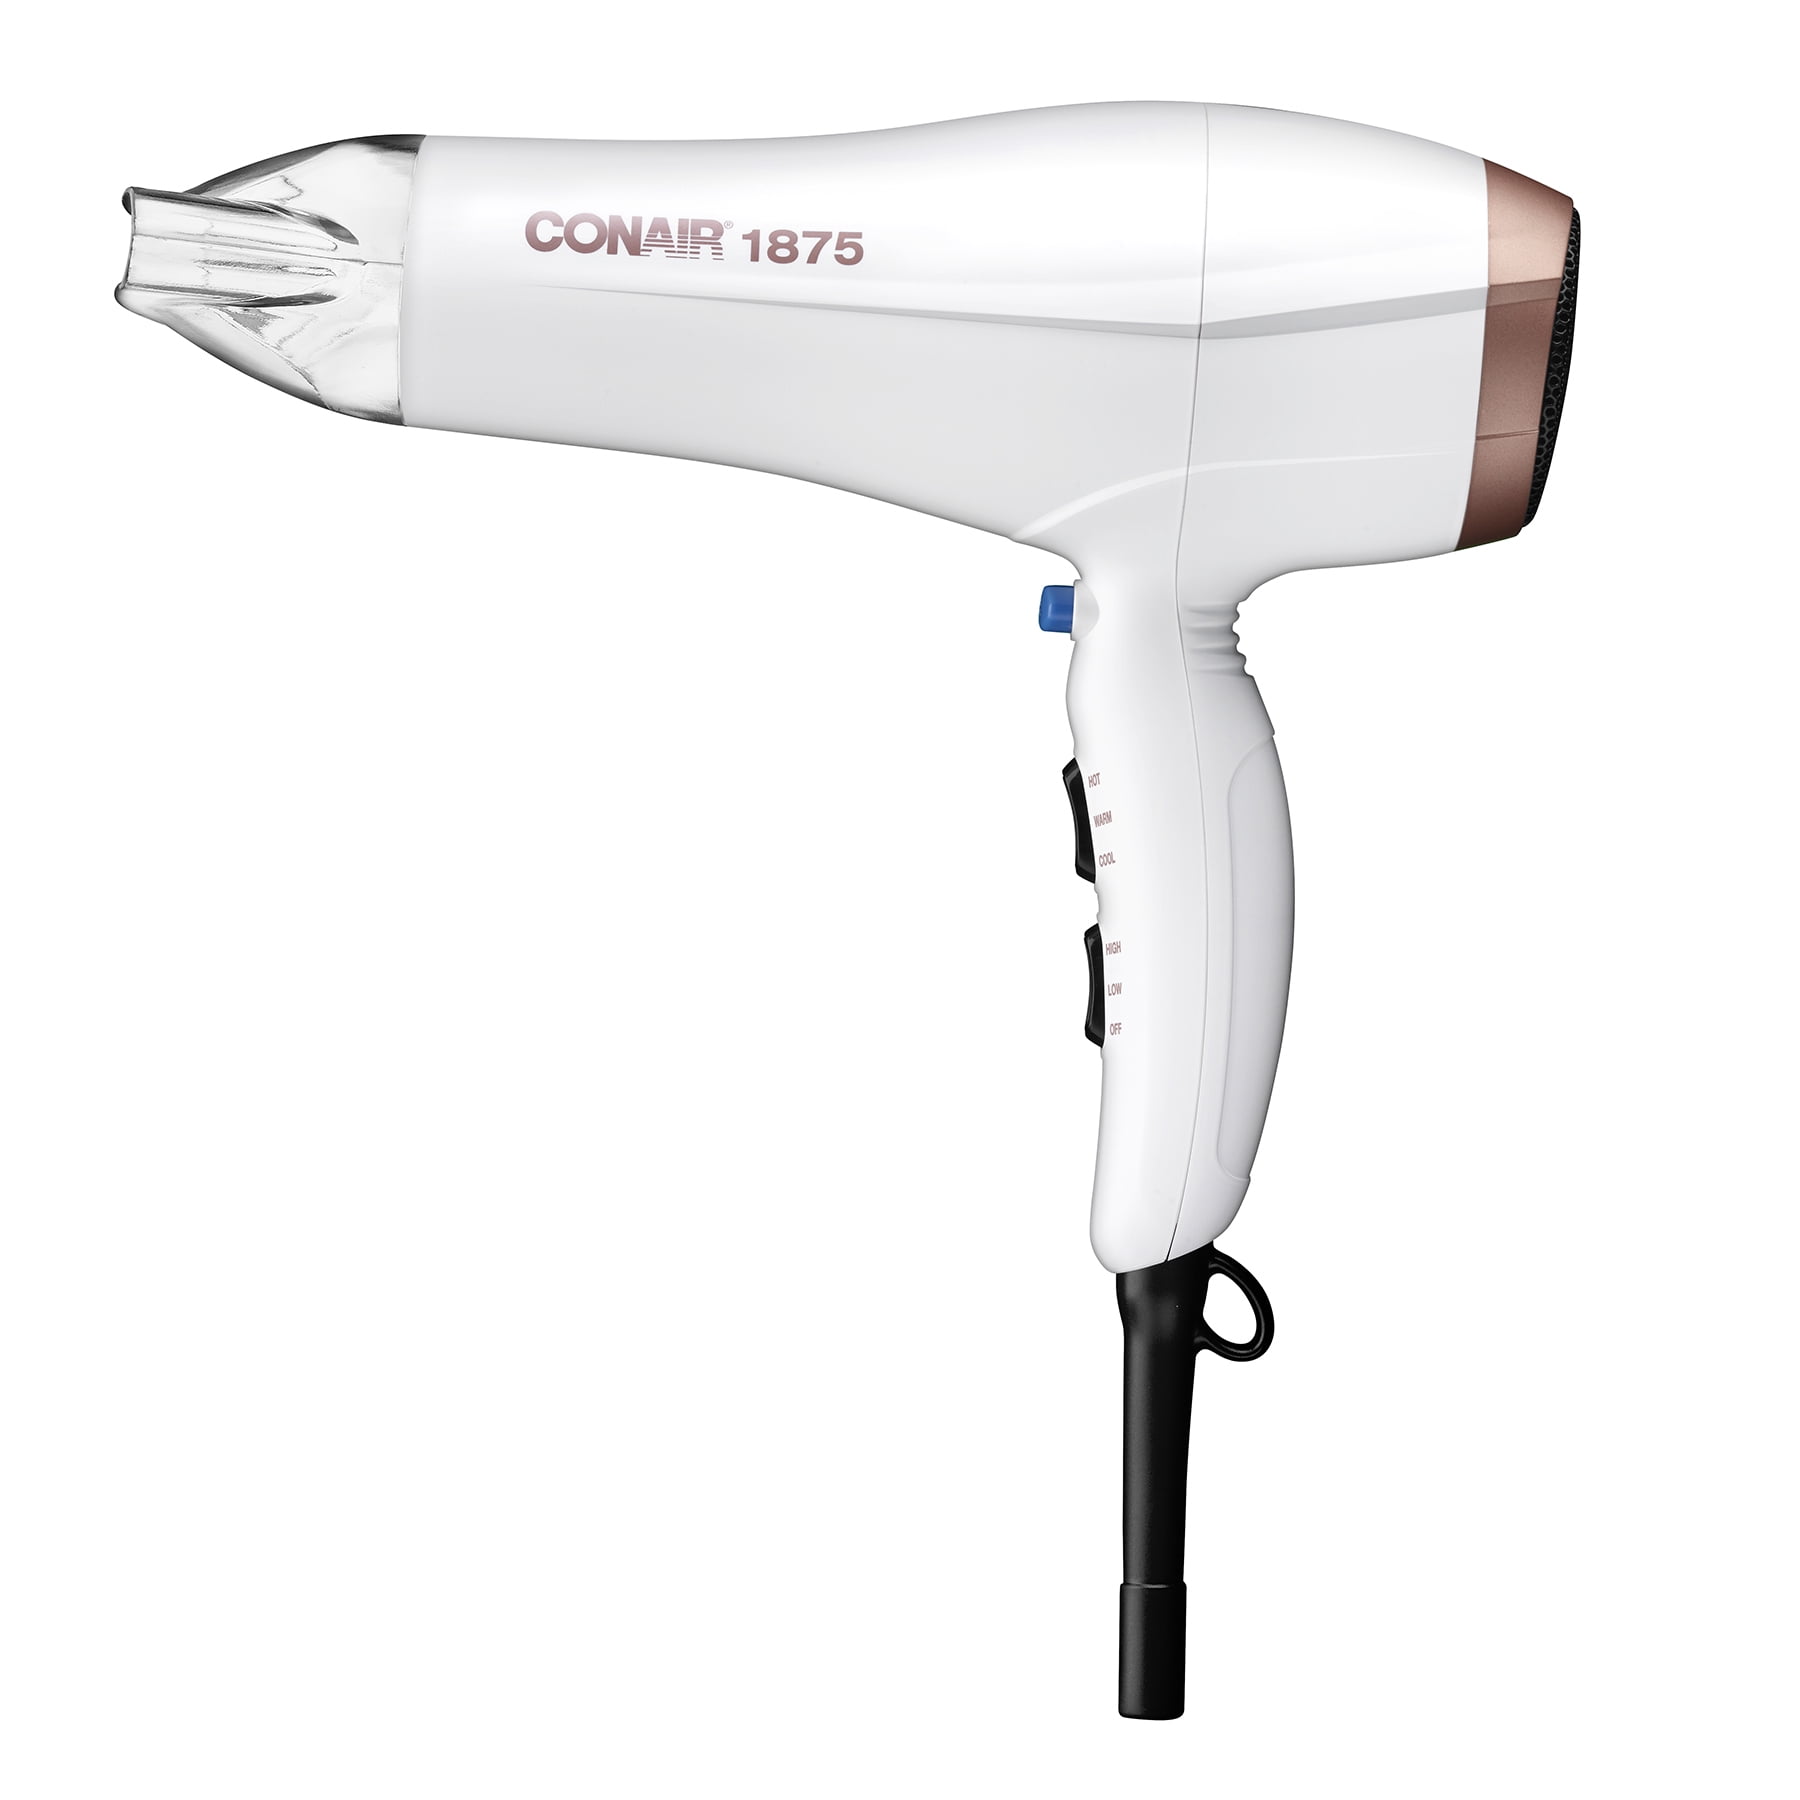 This Conair Hair Dryer Is Perfect for Travel